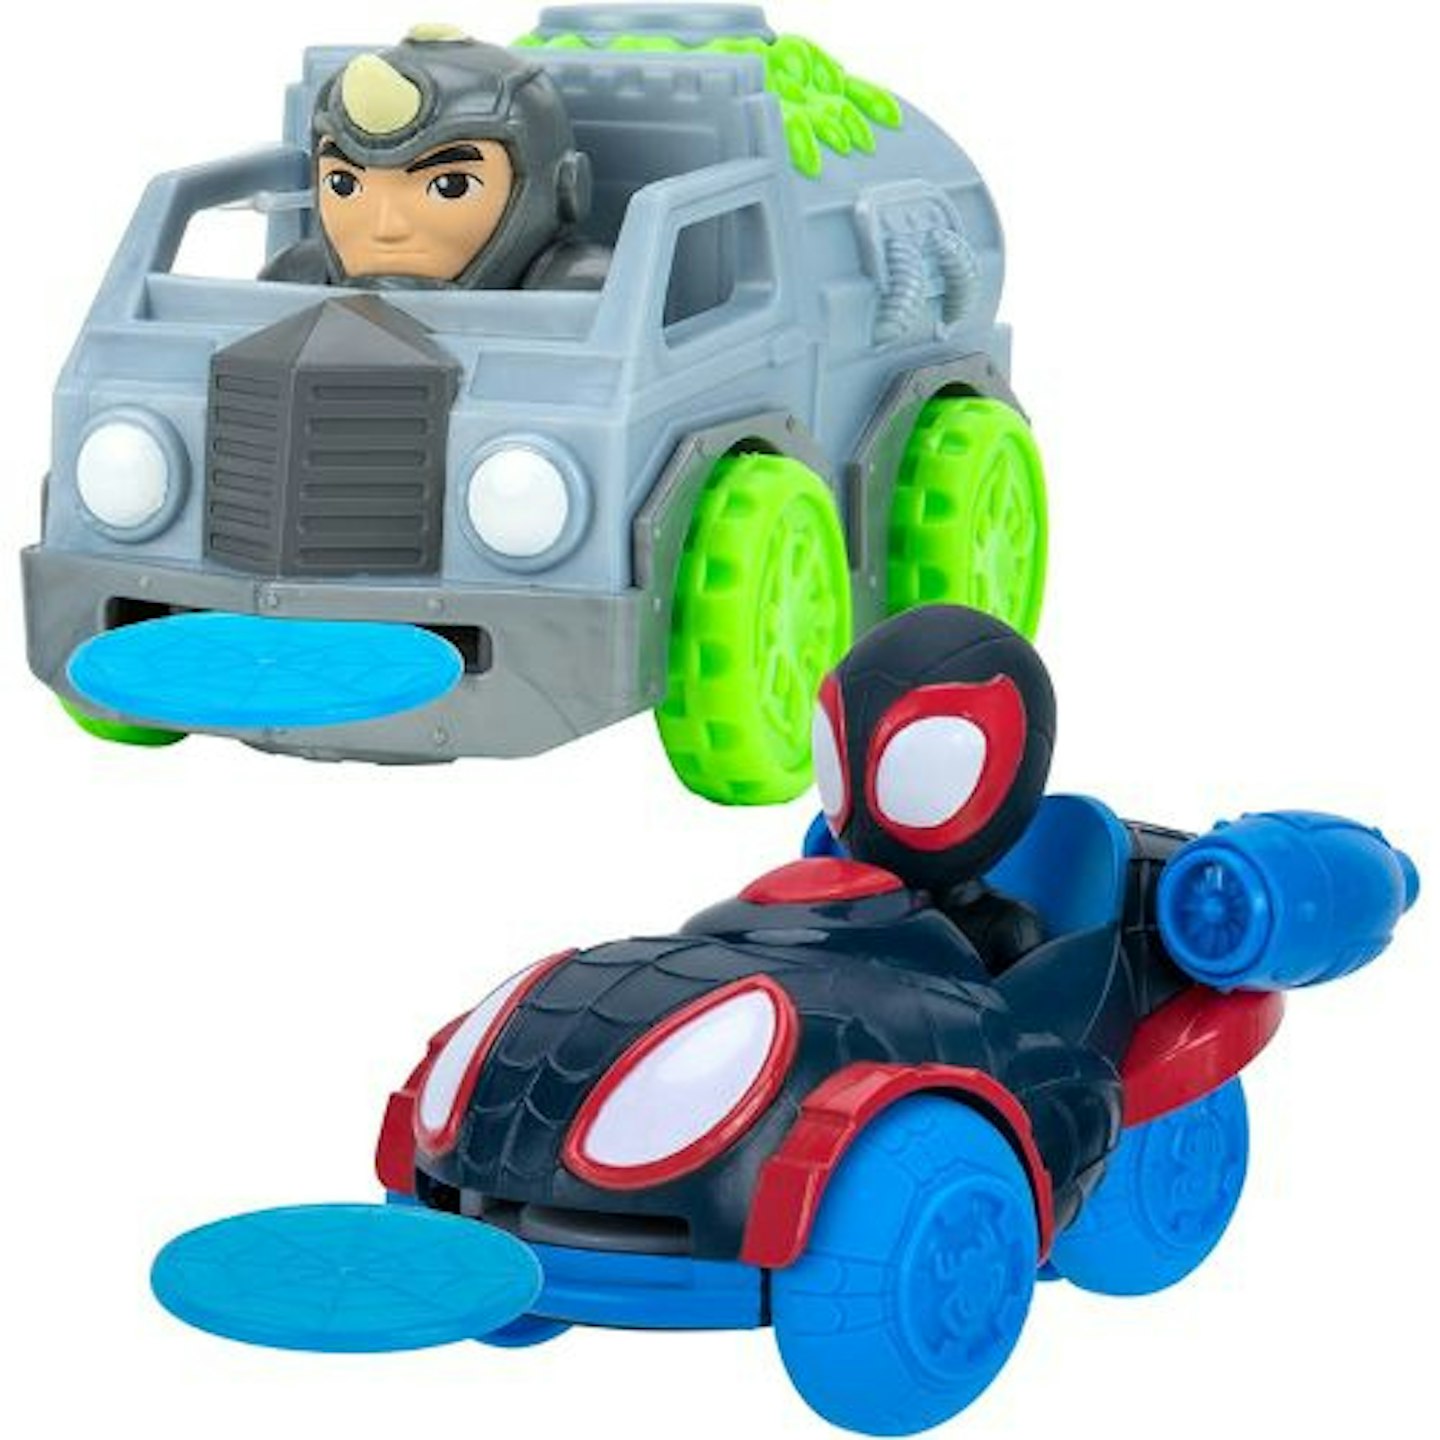 Spidey and his Amazing Friends SNF0054 Little Vehicle 2-Pack-5” Disc Dashers